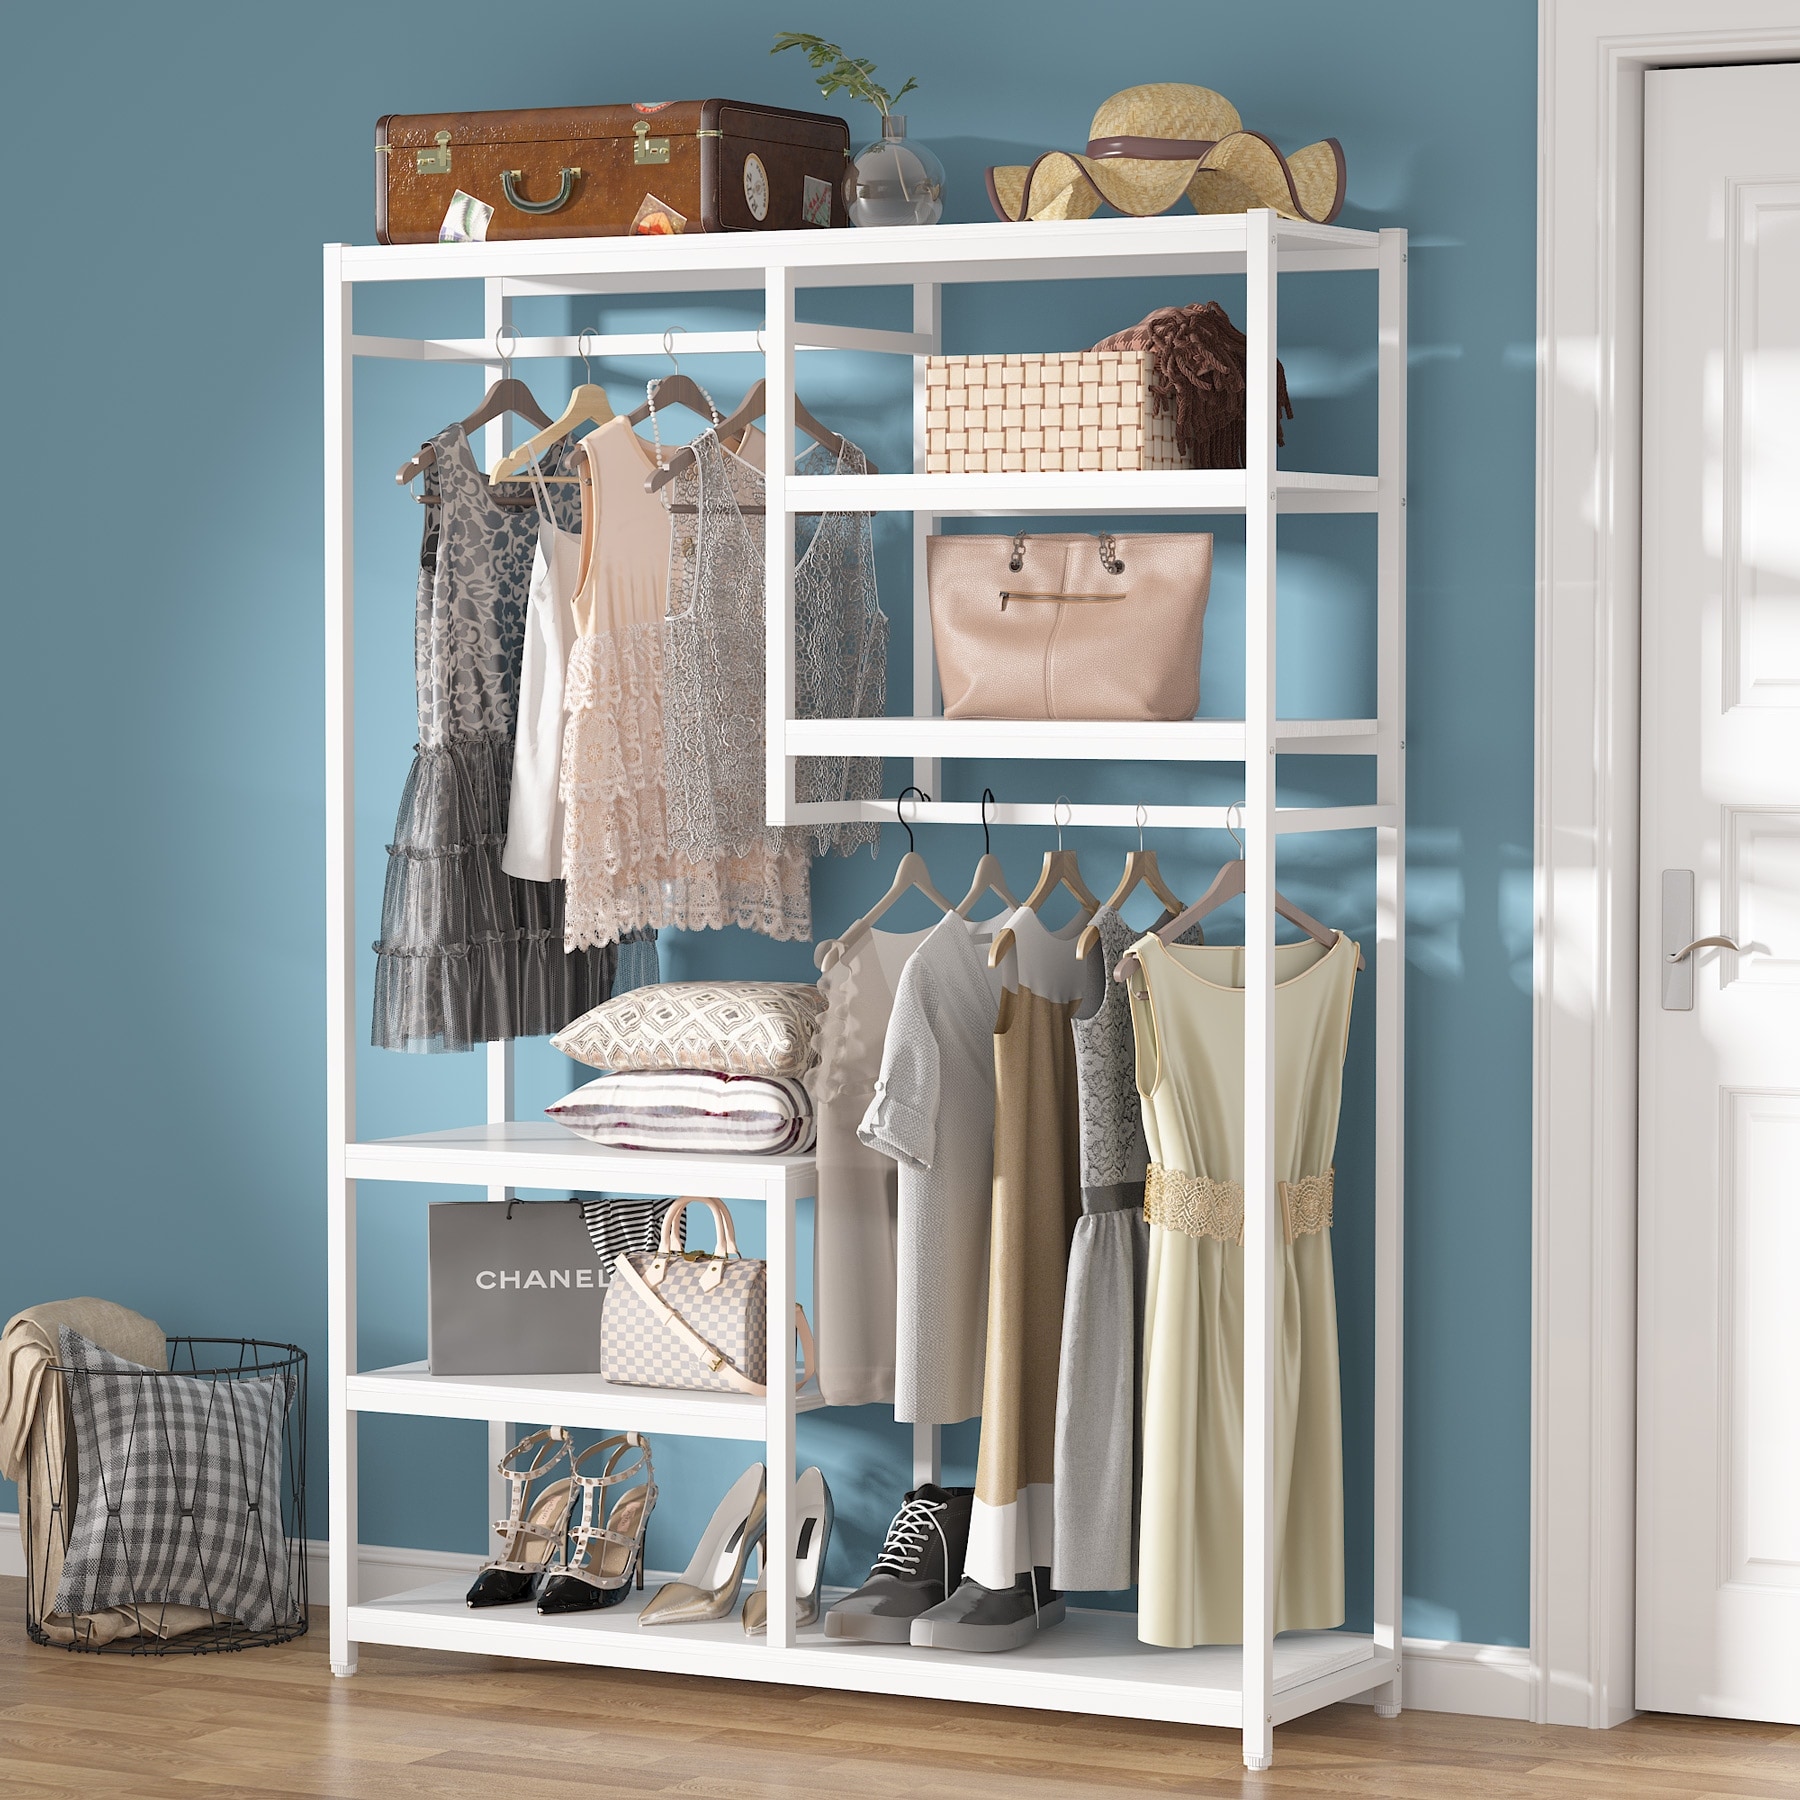 https://ak1.ostkcdn.com/images/products/is/images/direct/fc69e830c339e45a1f2c8e435120e1272a771a94/Large-closet-organizer-Double-Hanging-Rod-Clothes-Garment-Racks-with-Storage-Shelves.jpg